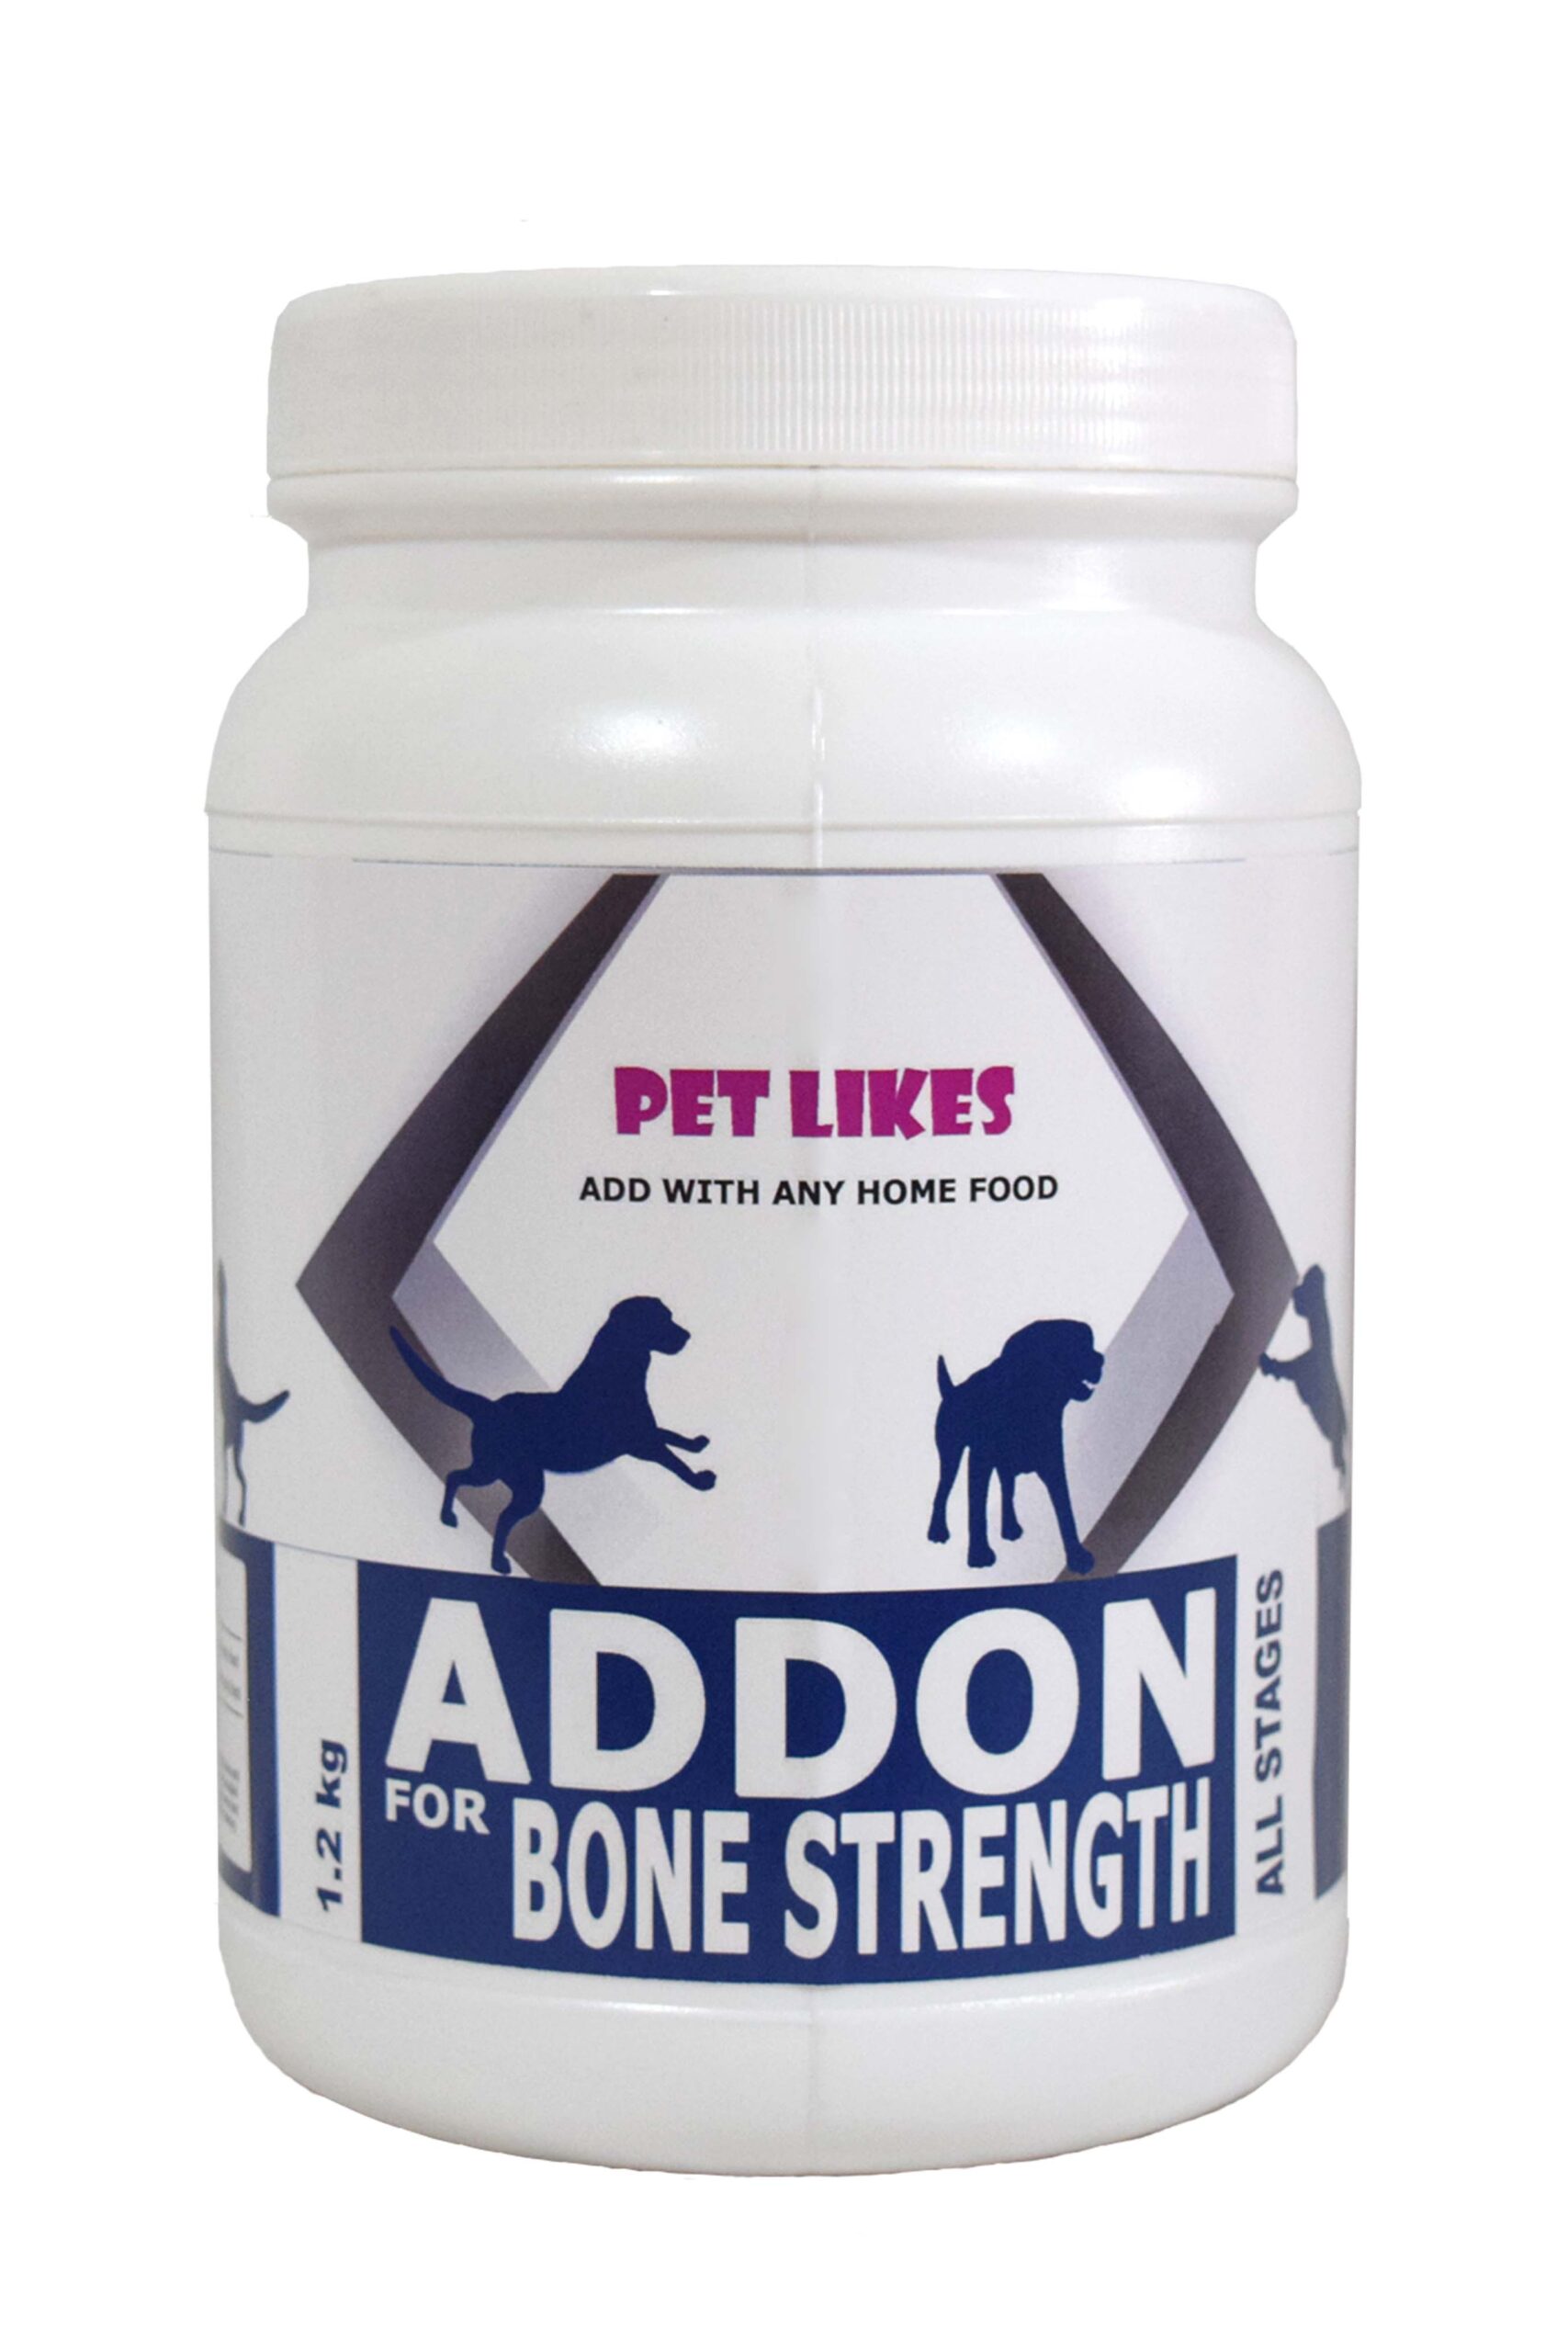 Pet Likes ADD ON Bone Strength – 1.2 Kg. Hip and Joint support